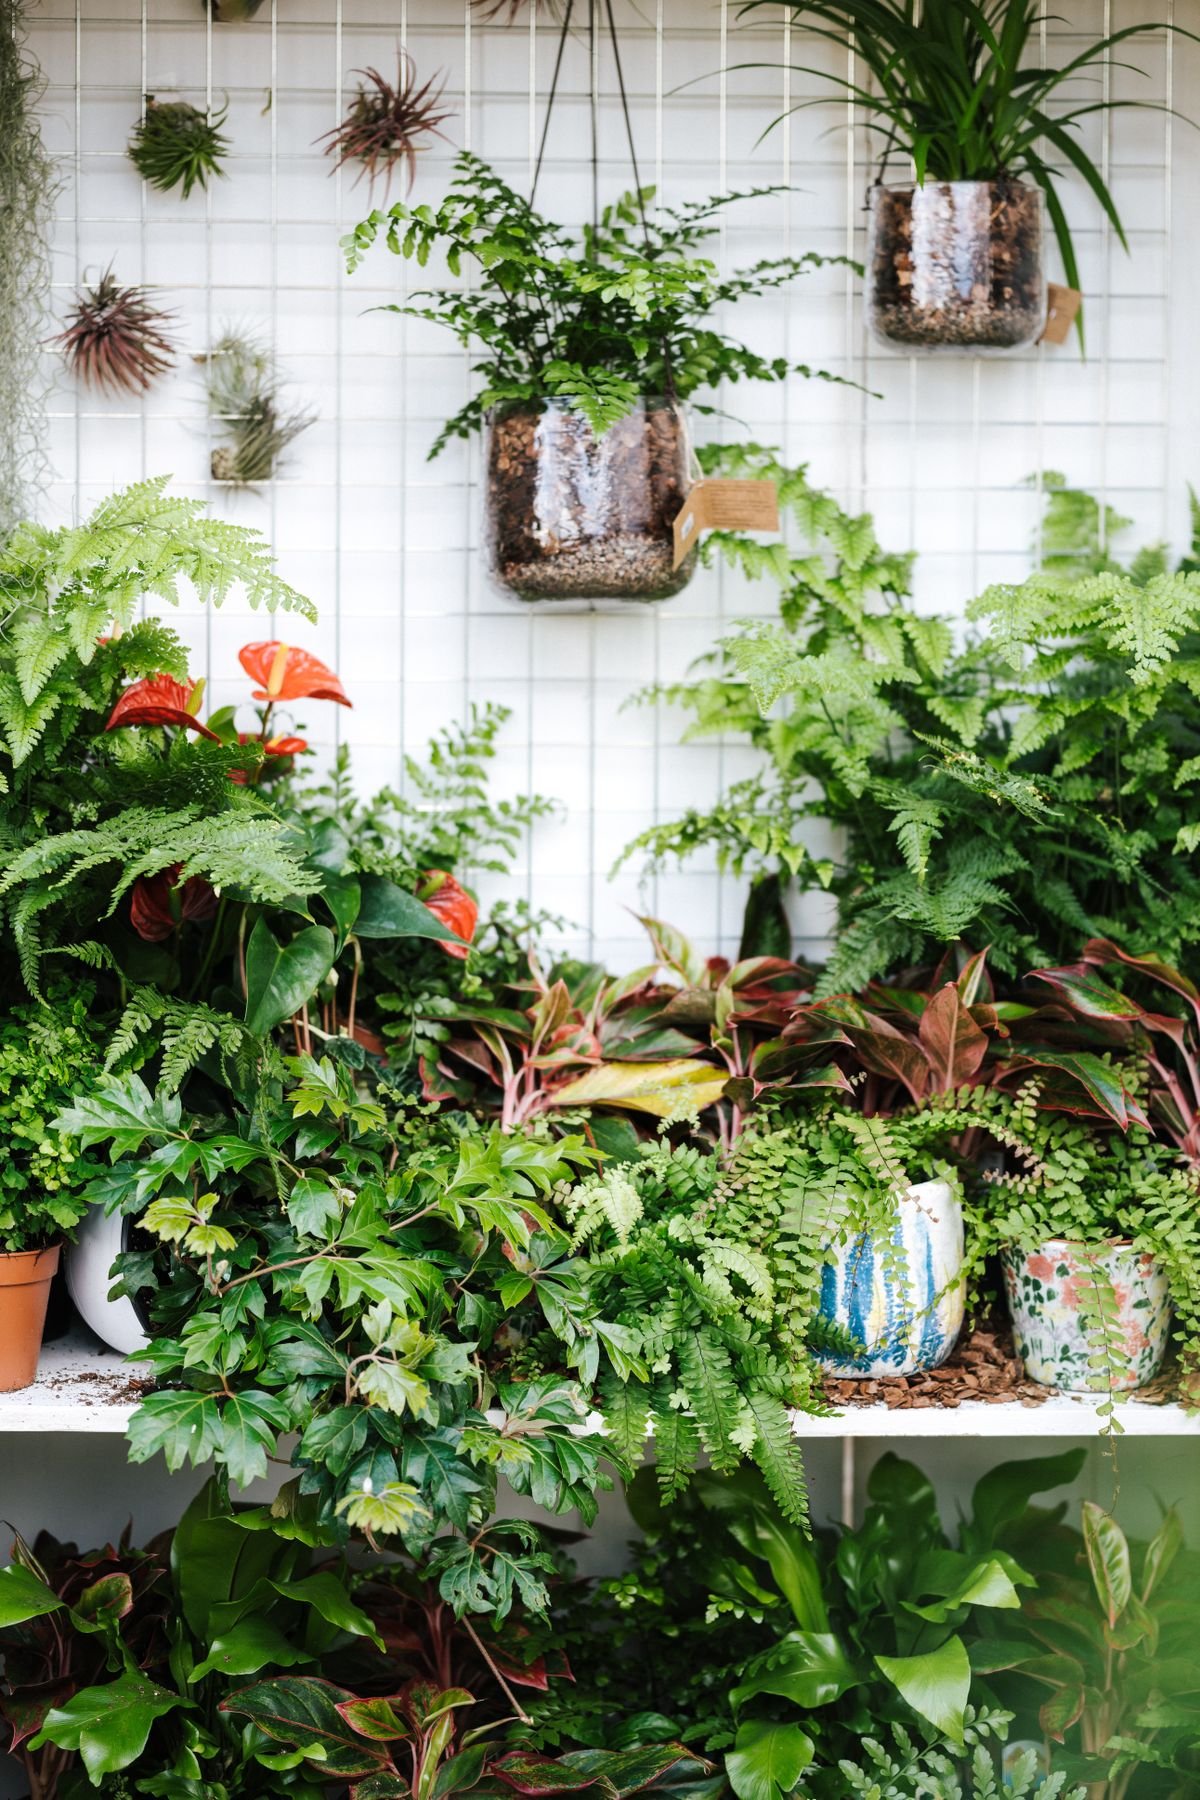 12 easy house plants: low-maintenance, forgiving and wonderfully indestructible